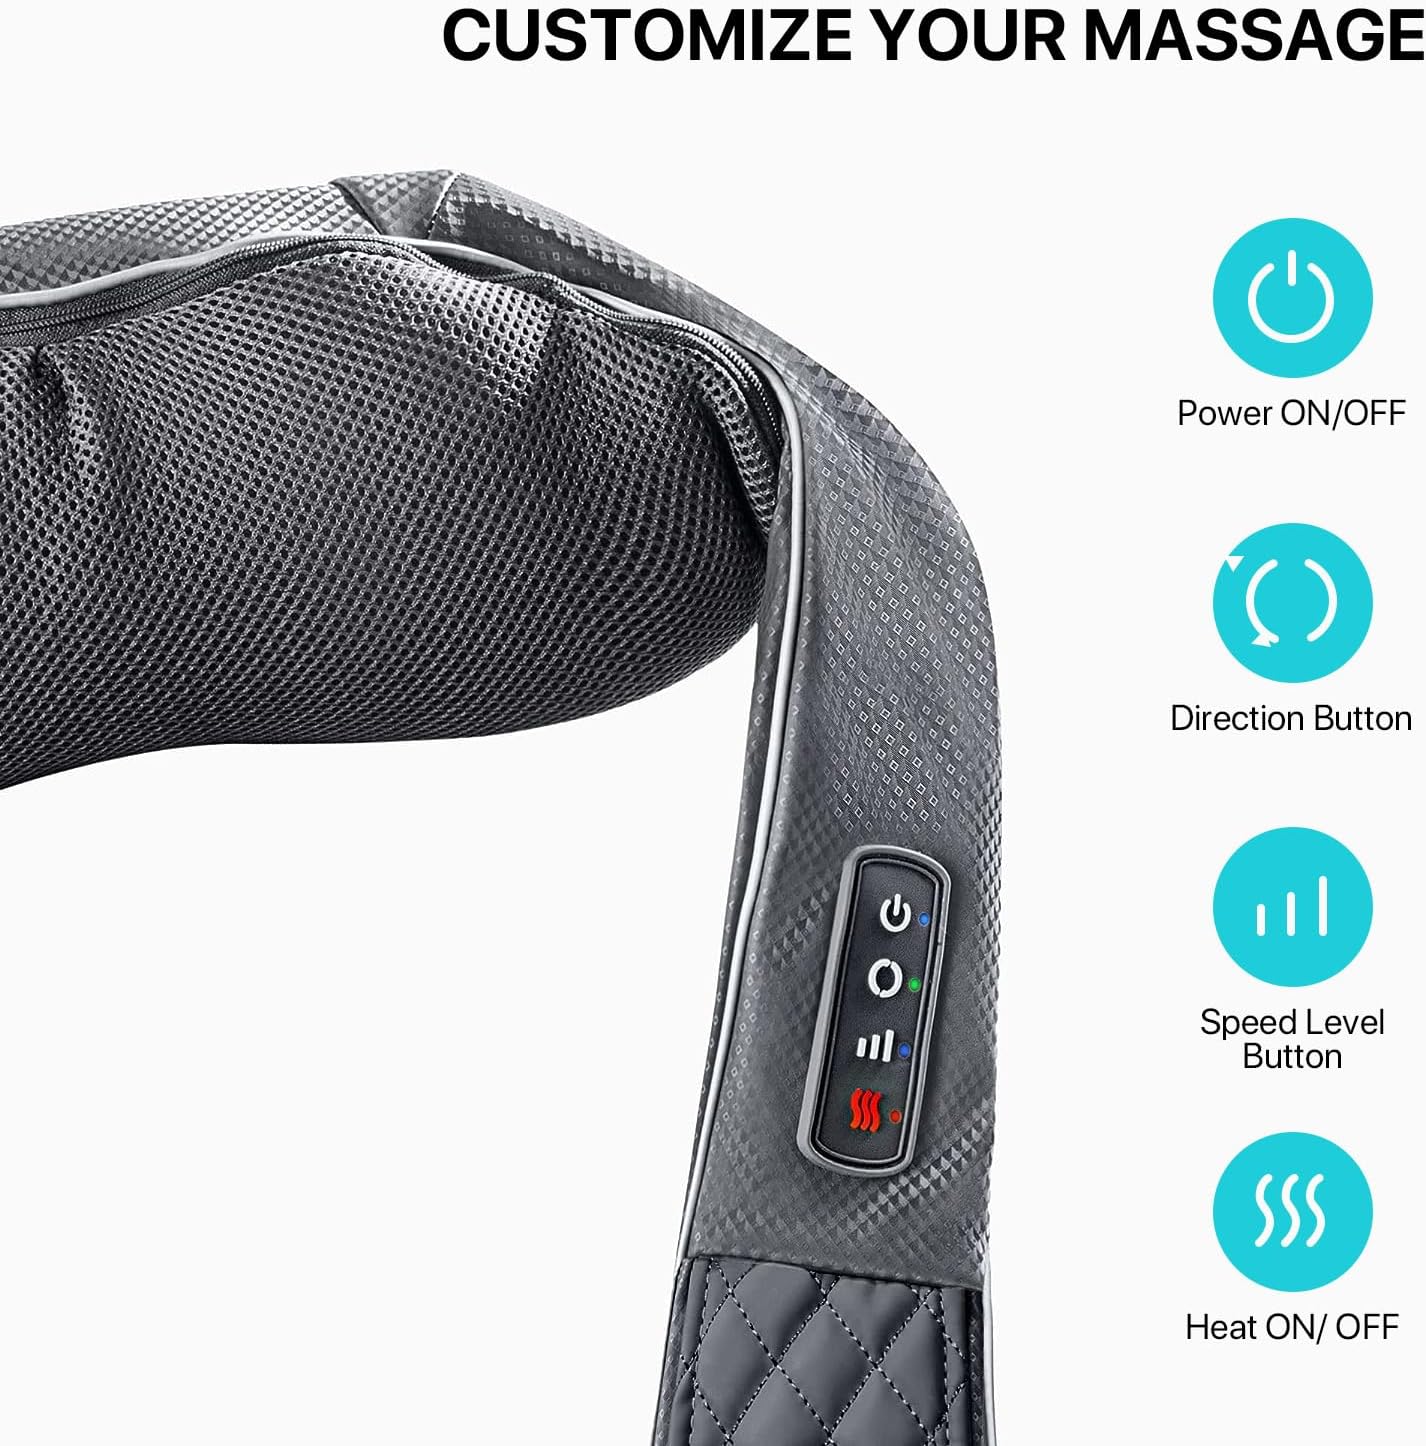 ALLJOY Shiatsu Back and Neck Massager with Heat, Electric Deep